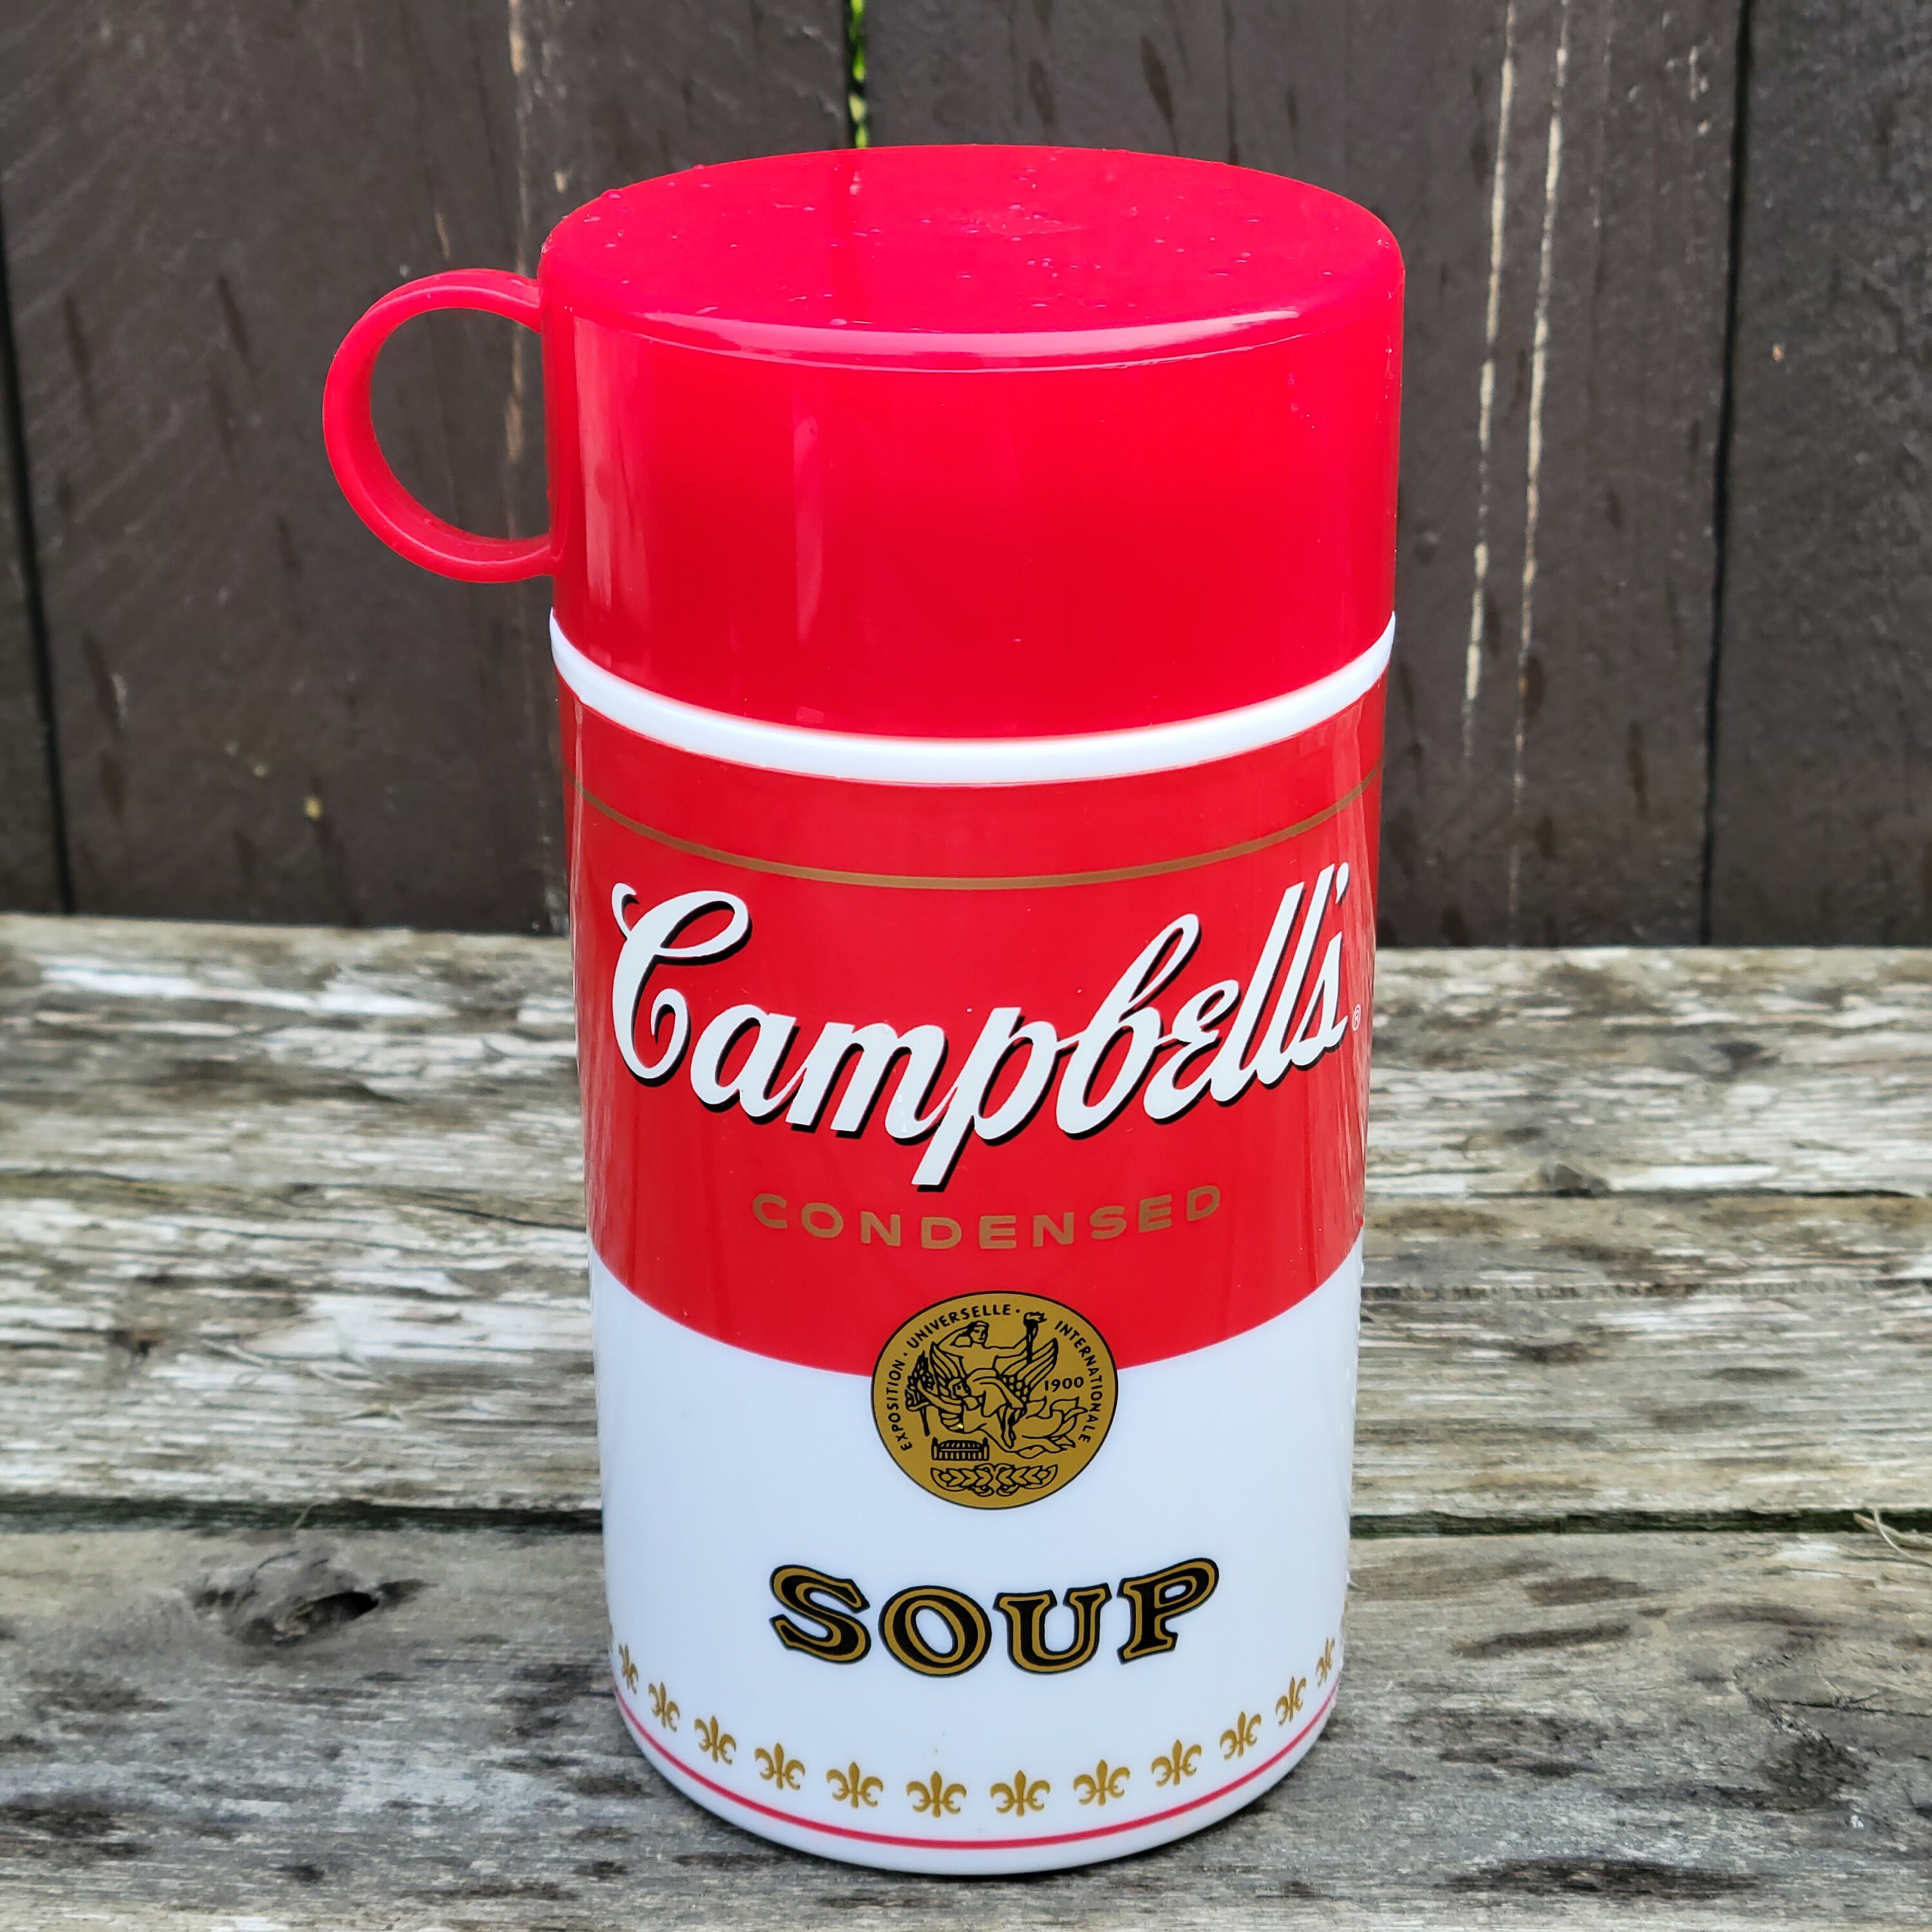 Vintage Campbell's Soup Thermos, can-tainer, Red and White